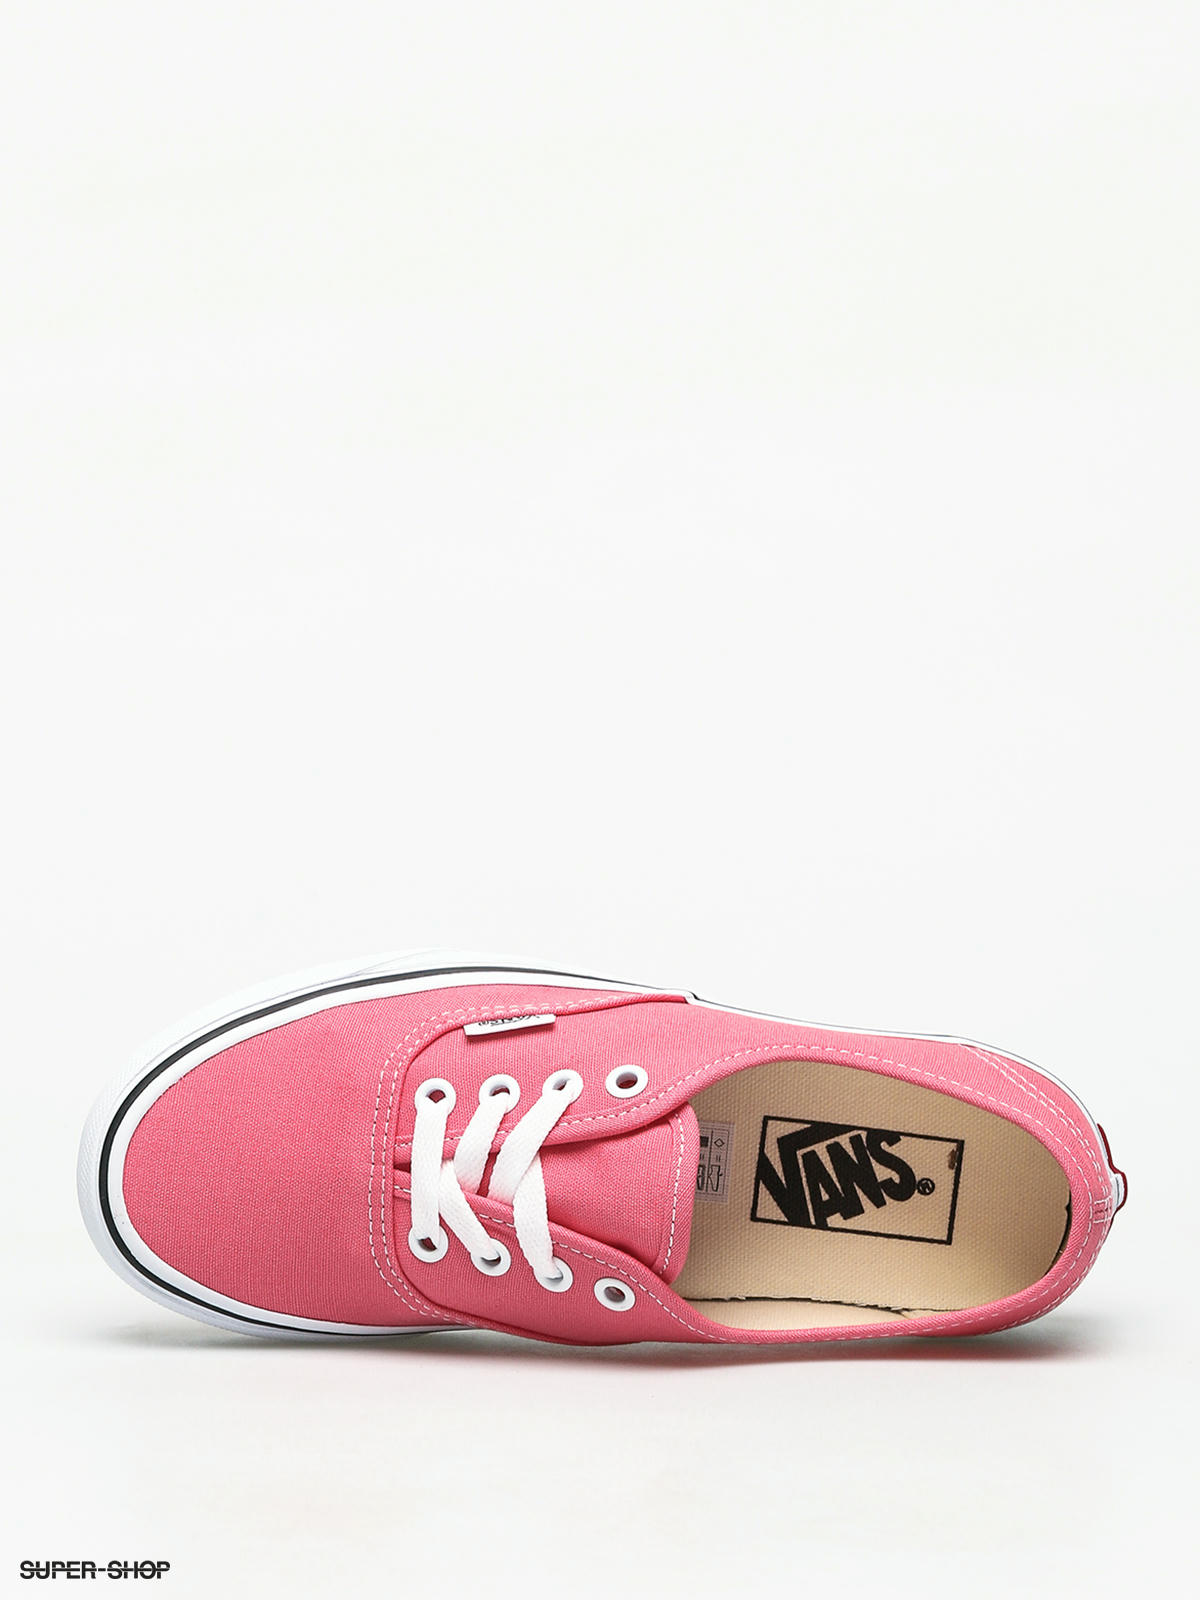 vans strawberry shoes green